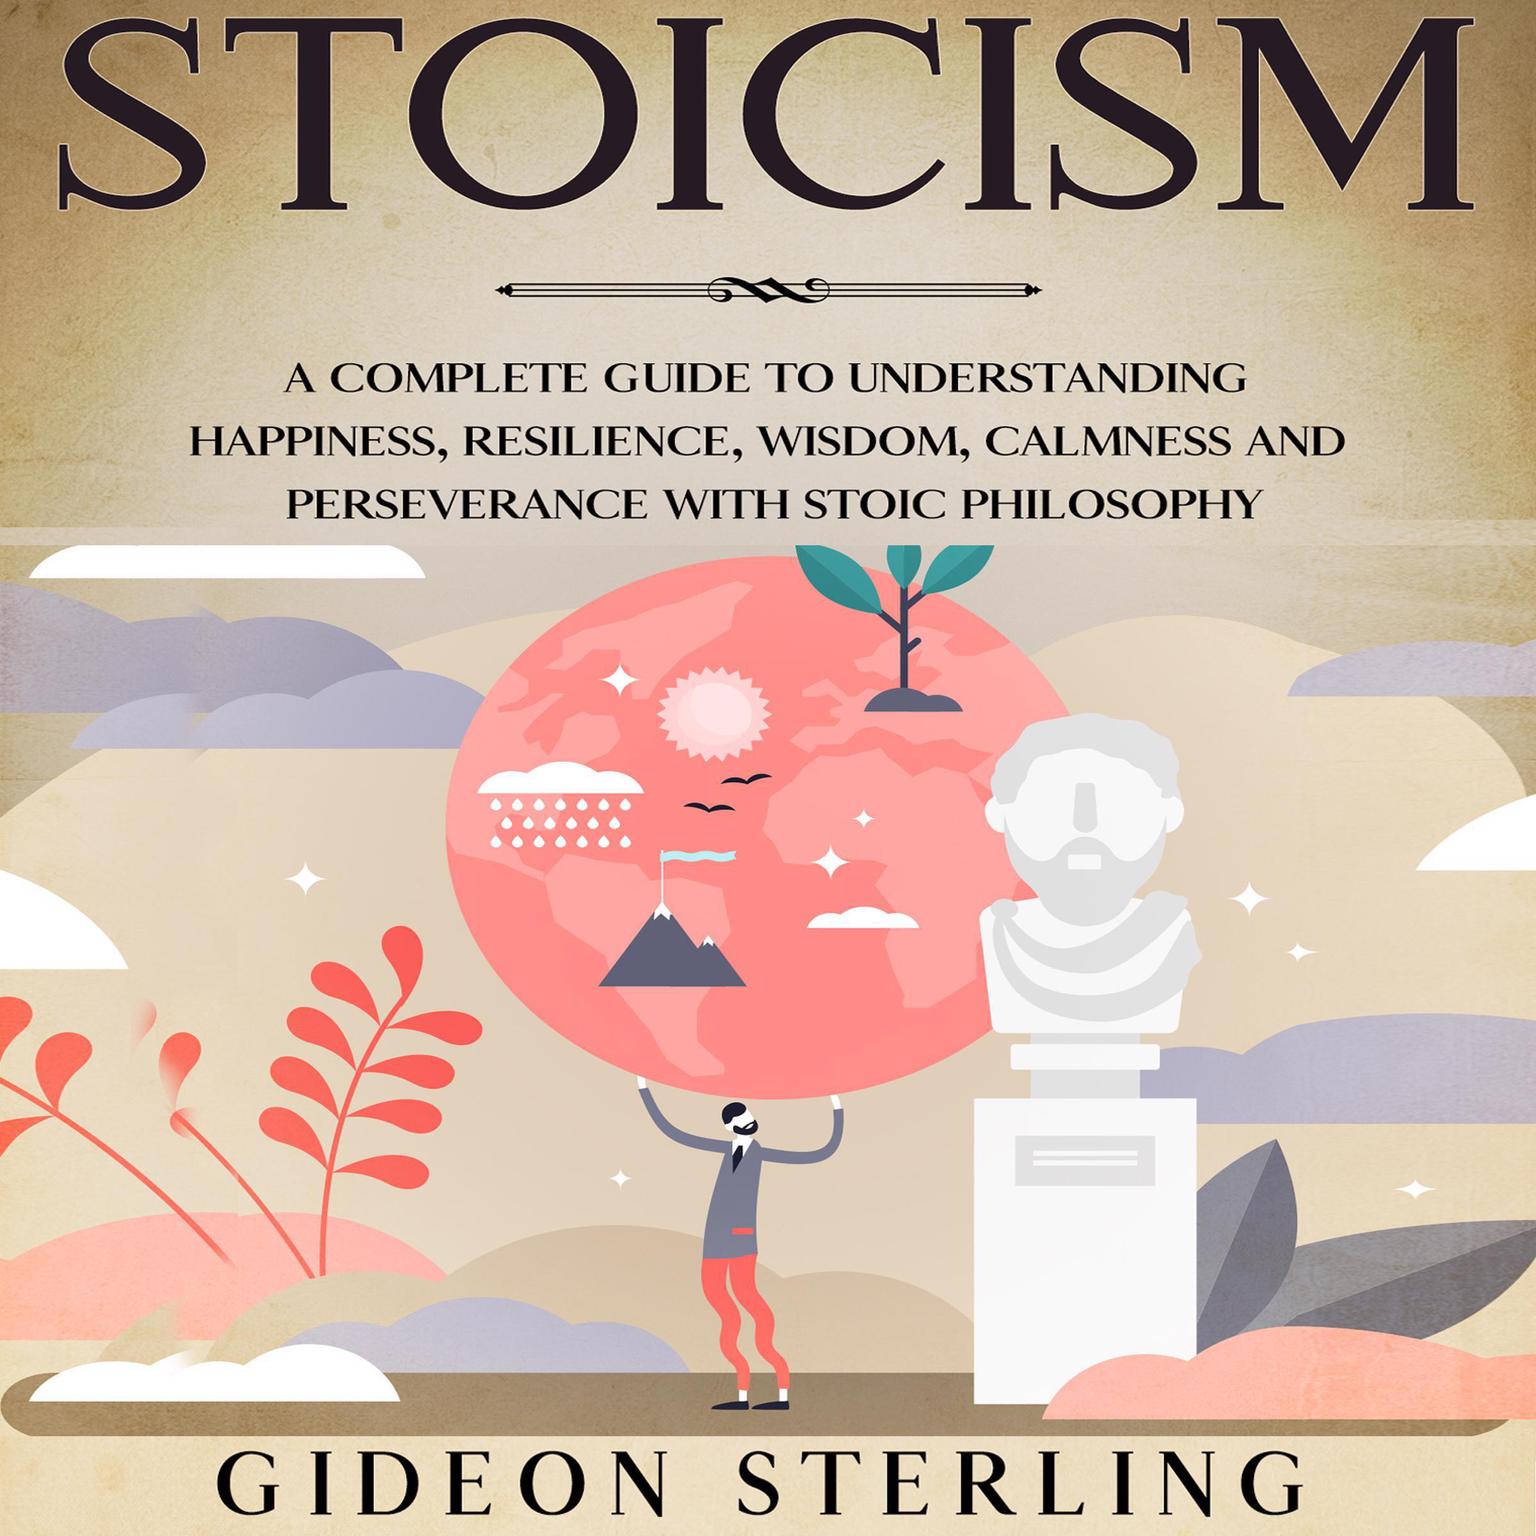 Stoicism: A Complete Guide to Understanding Happiness, Resilience, Wisdom, Calmness and Perseverance with Stoic Philosophy Audiobook, by Gideon Sterling